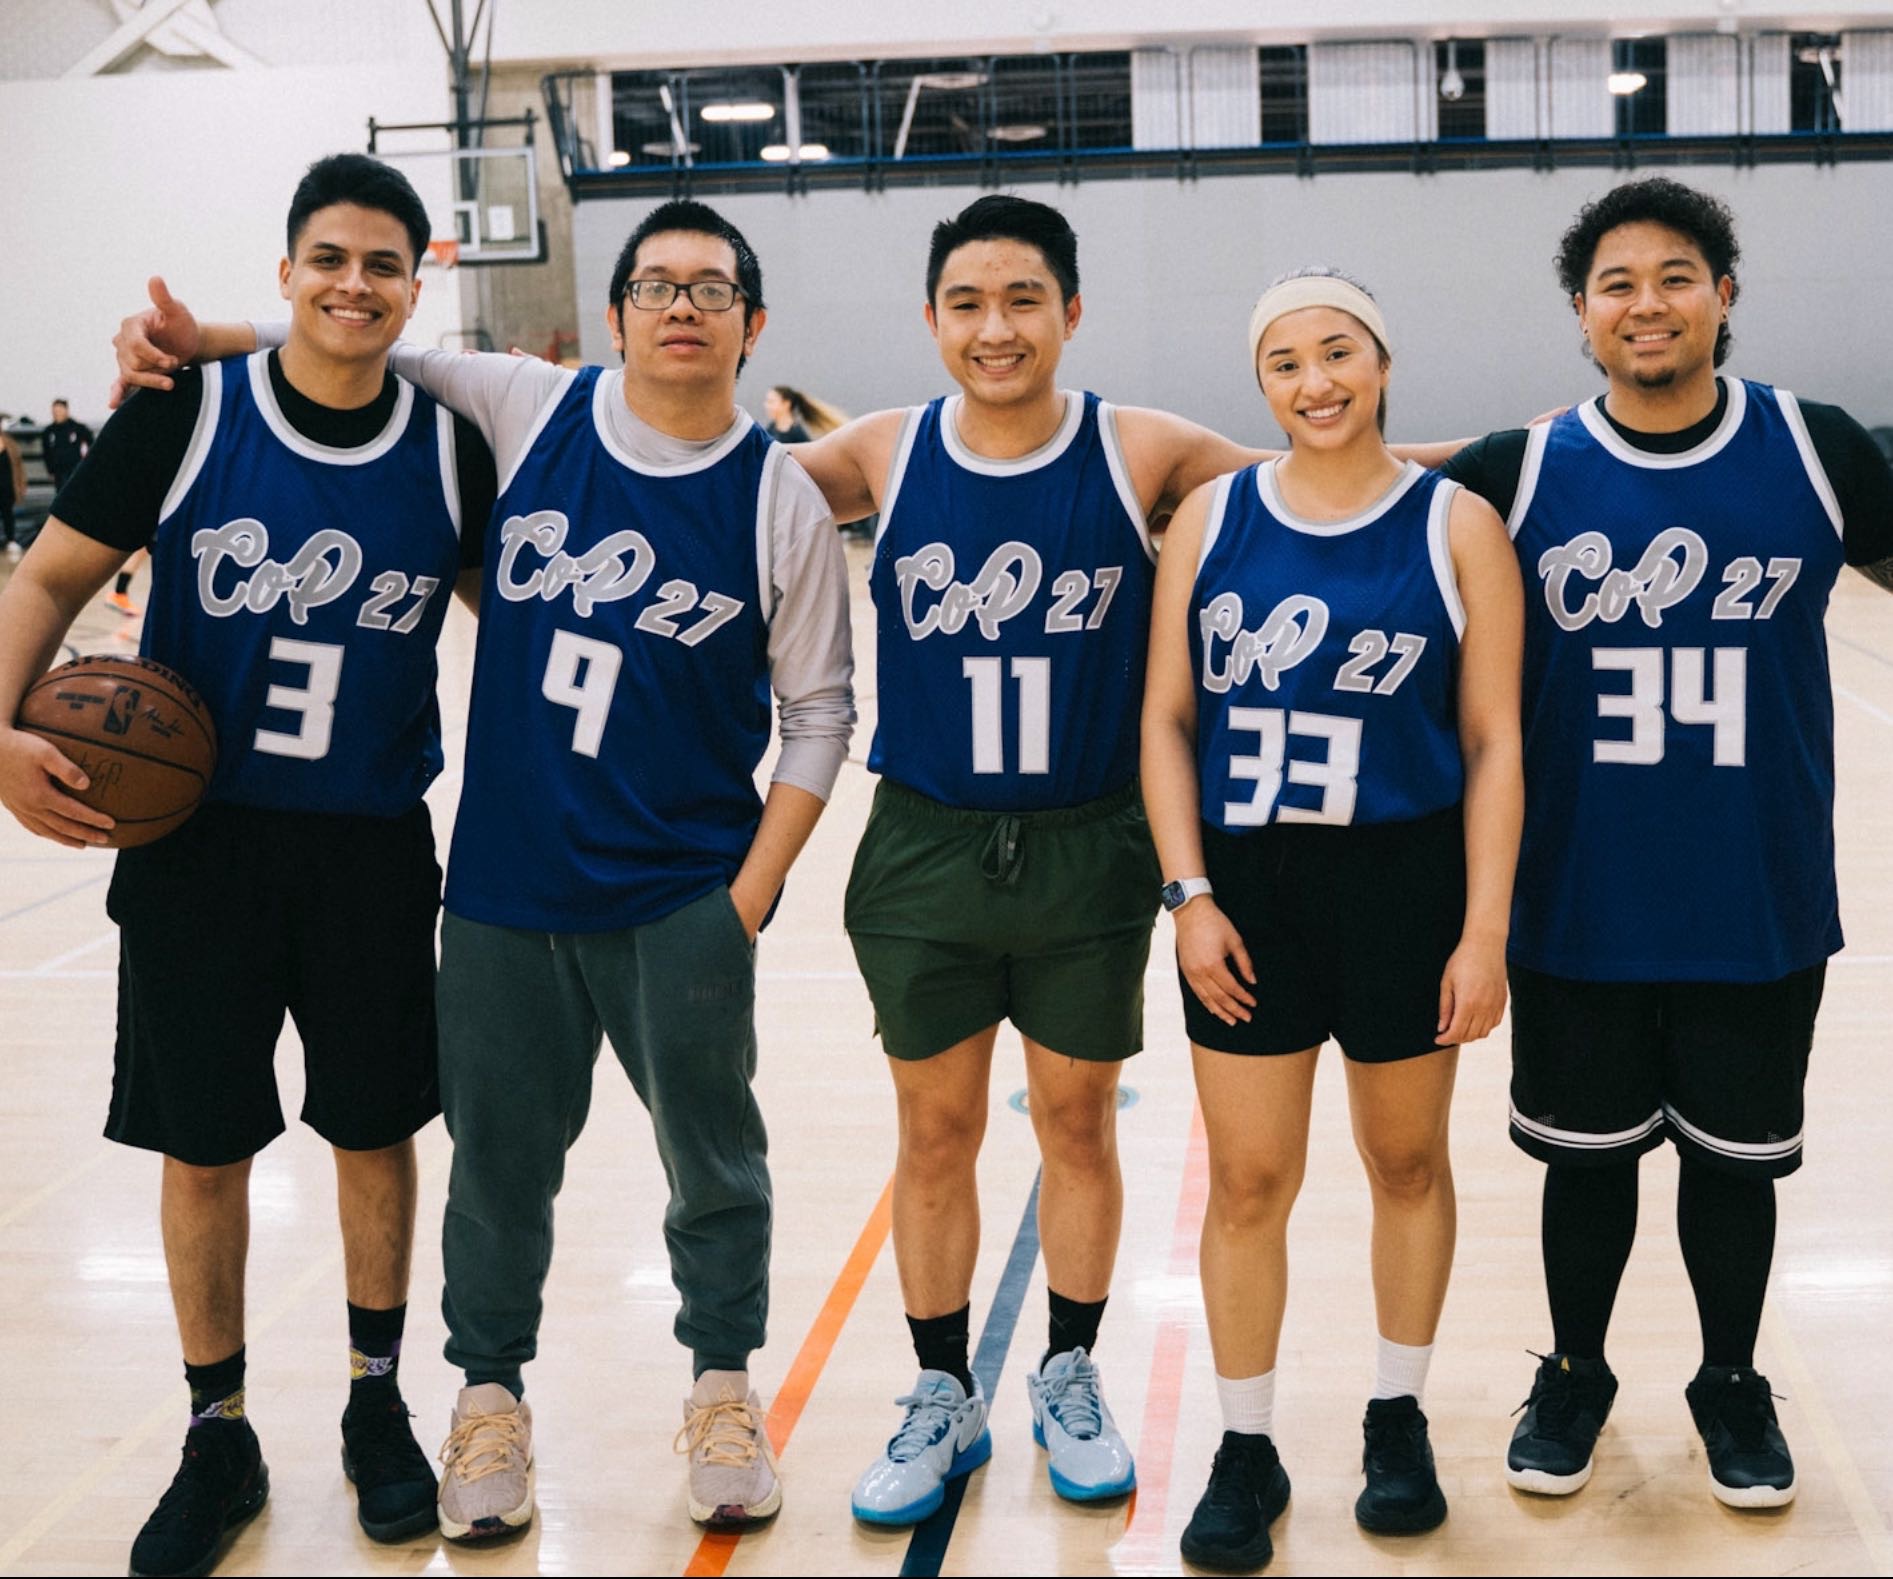 A group of students standing together on a basketball court with matching jerseys